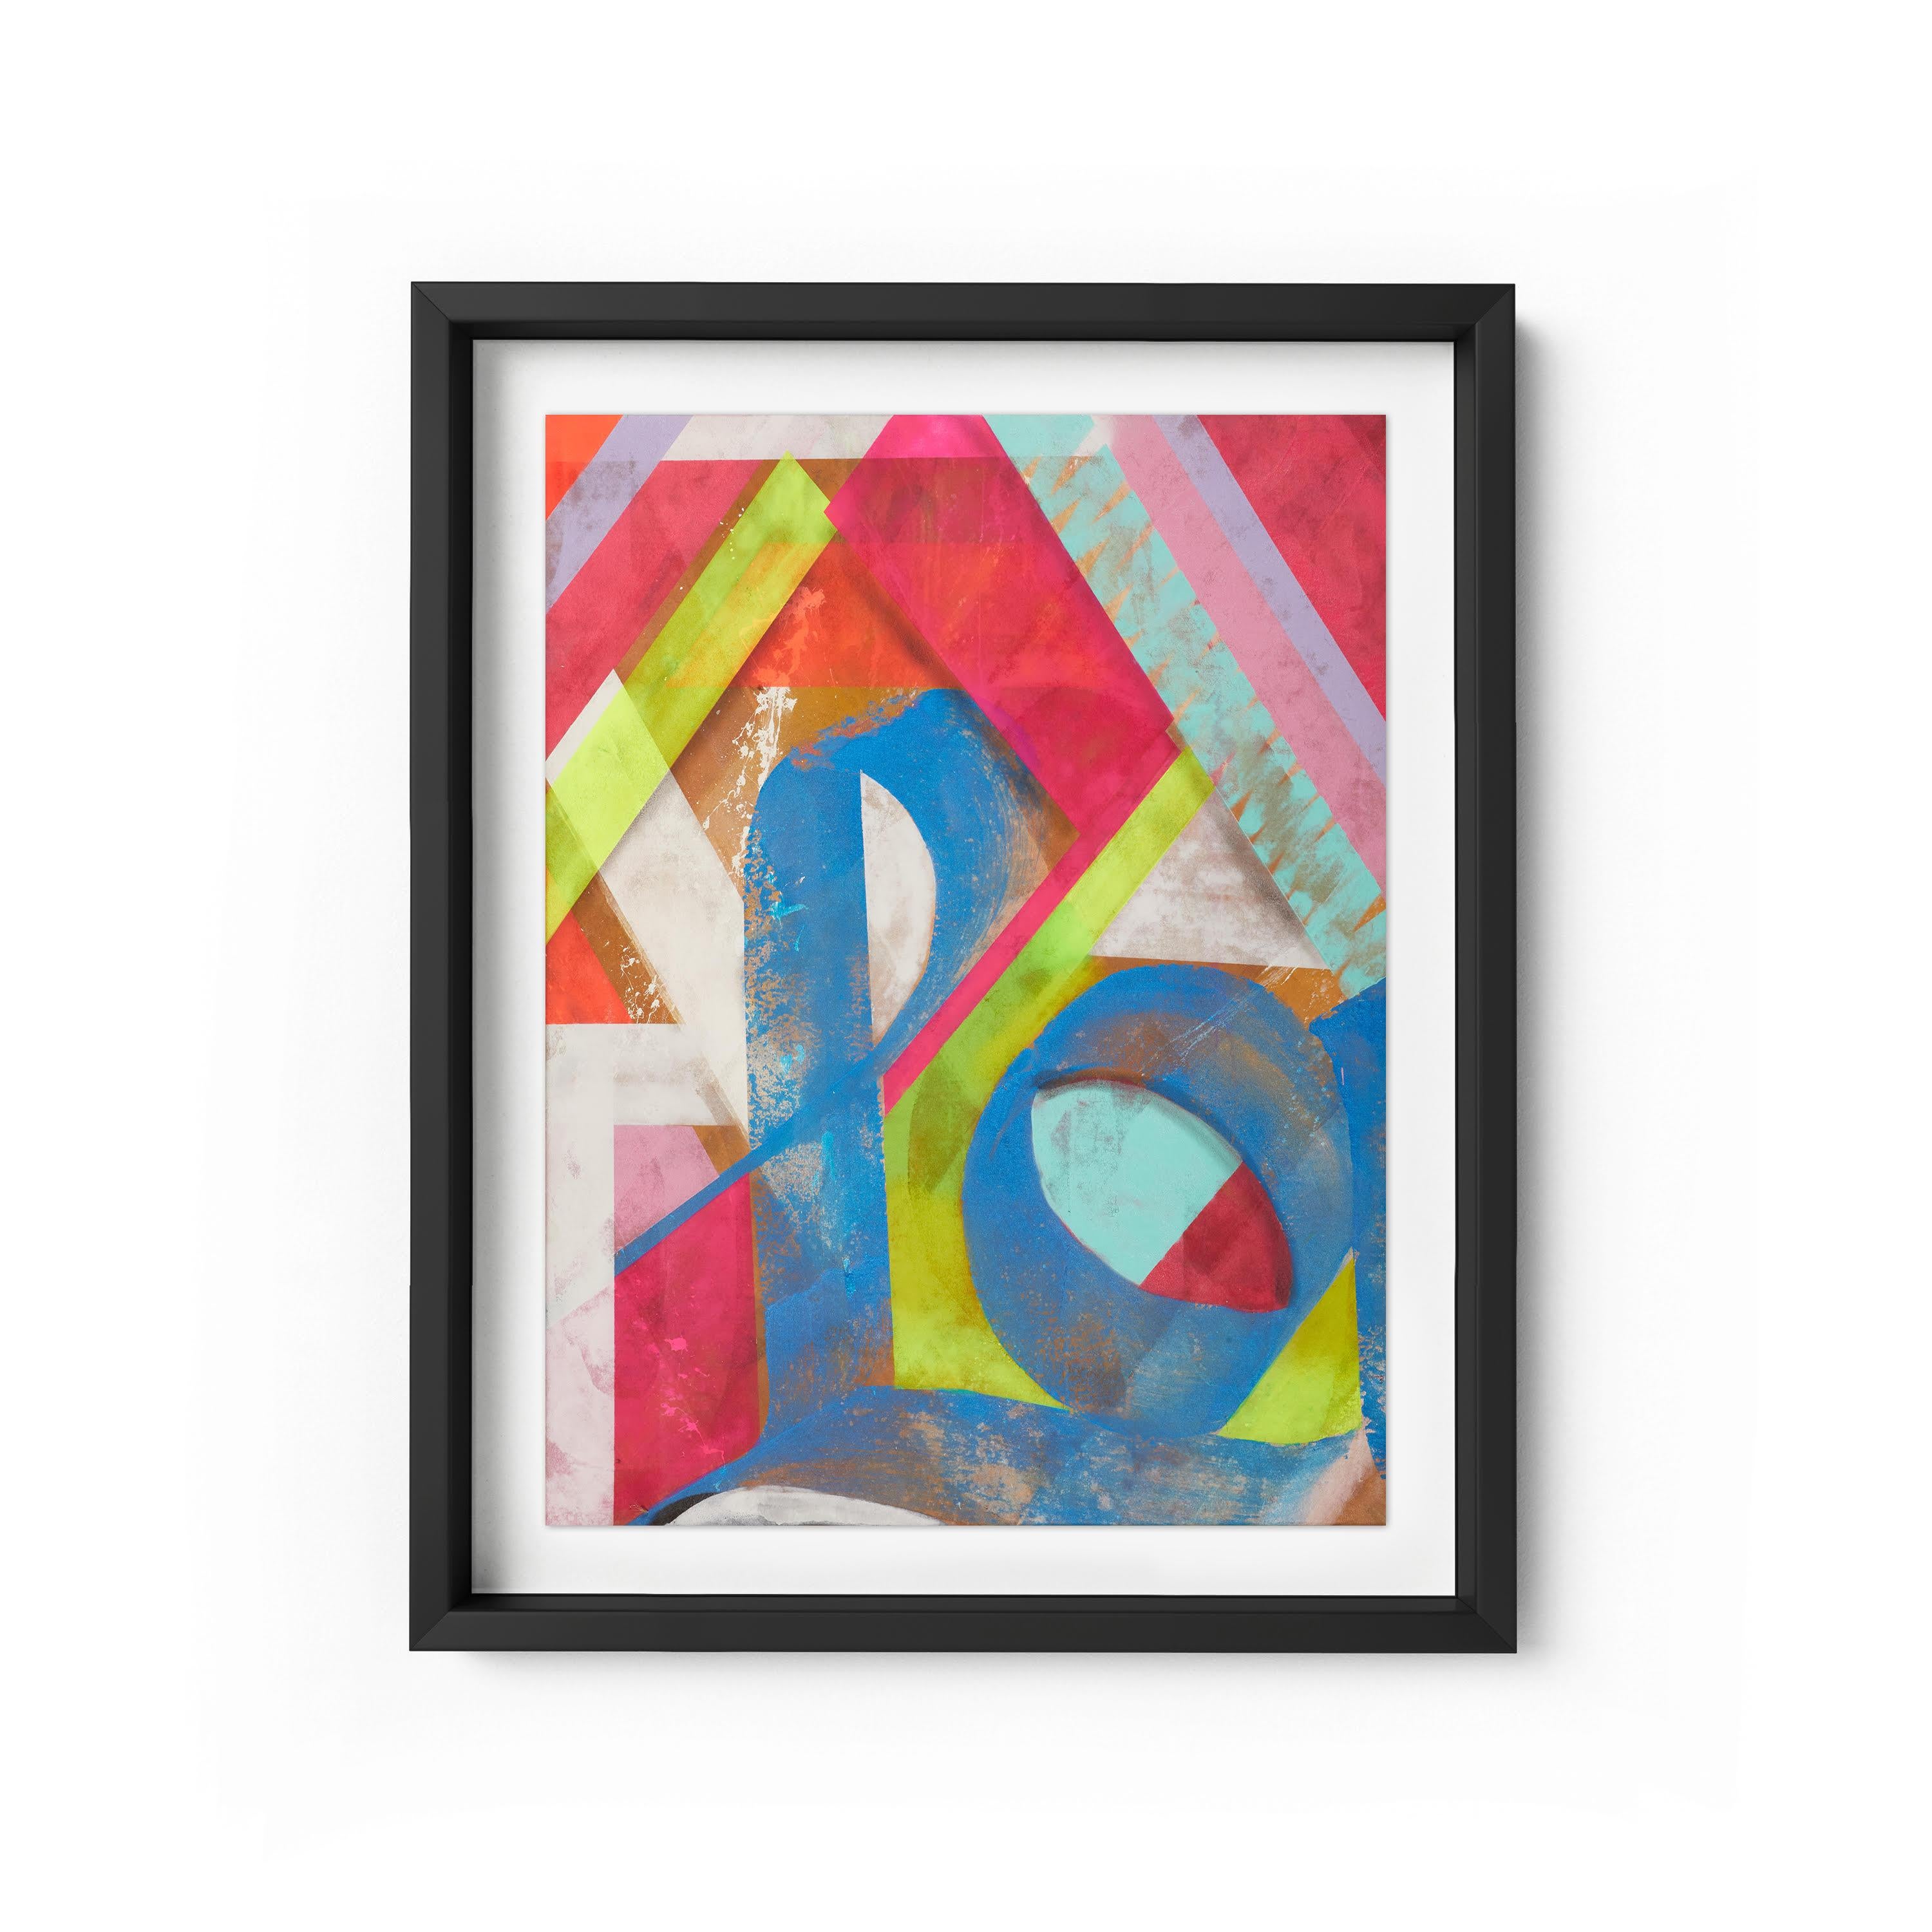 Luxe - Framed Limited Edition Print - Contemporary - Modern Abstract - Beige Abstract Print by Karlos Marquez